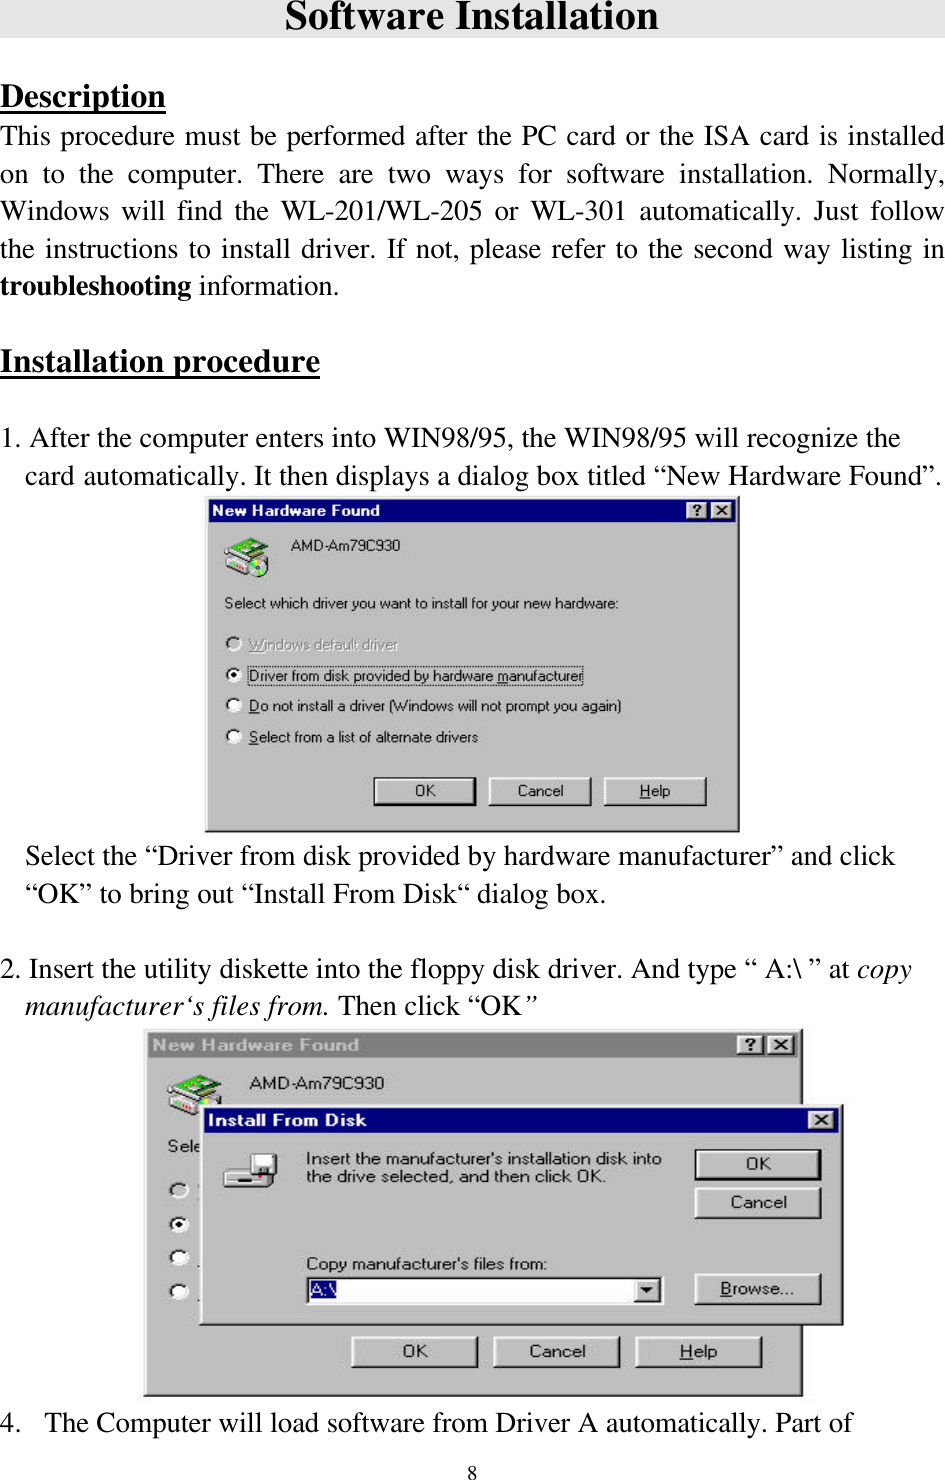 8Software InstallationDescriptionThis procedure must be performed after the PC card or the ISA card is installedon to the computer. There are two ways for software installation. Normally,Windows will find the WL-201/WL-205 or WL-301 automatically. Just followthe instructions to install driver. If not, please refer to the second way listing introubleshooting information.Installation procedure1. After the computer enters into WIN98/95, the WIN98/95 will recognize thecard automatically. It then displays a dialog box titled “New Hardware Found”.Select the “Driver from disk provided by hardware manufacturer” and click“OK” to bring out “Install From Disk“ dialog box.2. Insert the utility diskette into the floppy disk driver. And type “ A:\ ” at copymanufacturer‘s files from. Then click “OK”4.  The Computer will load software from Driver A automatically. Part of   